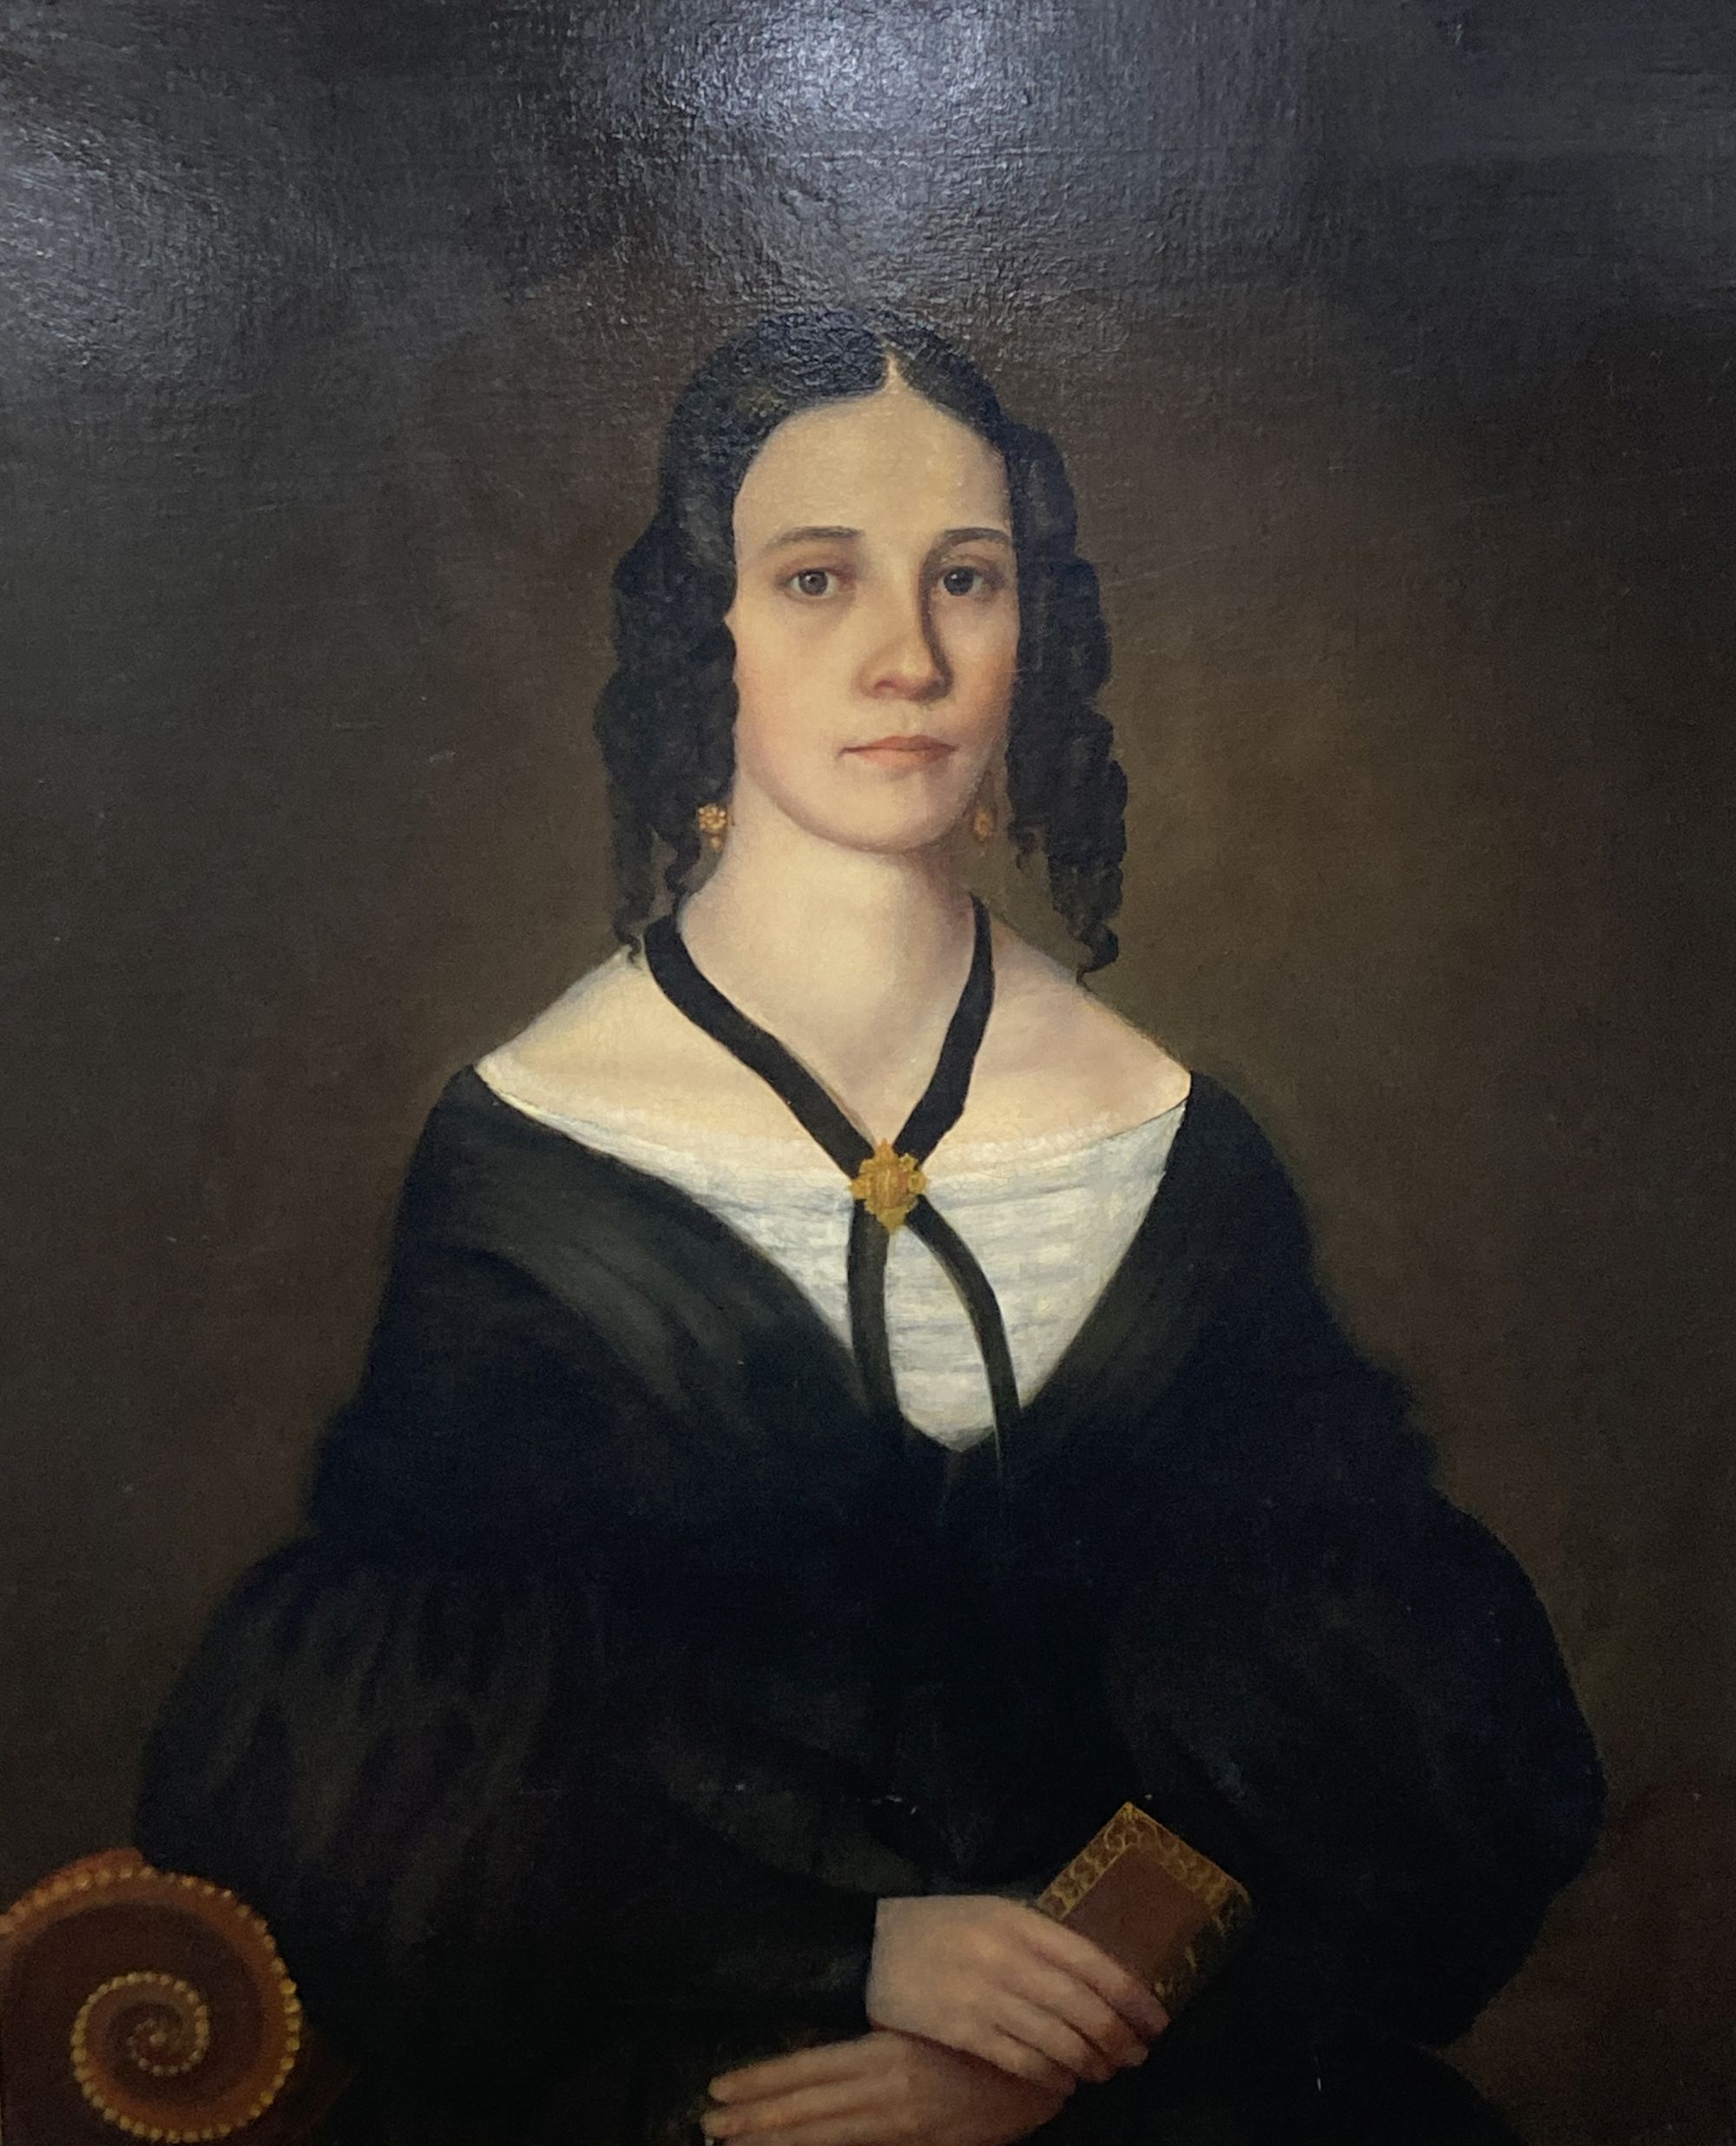 English School c.1840, oil on canvas, Half length portrait of a young lady, 90 x 75cm